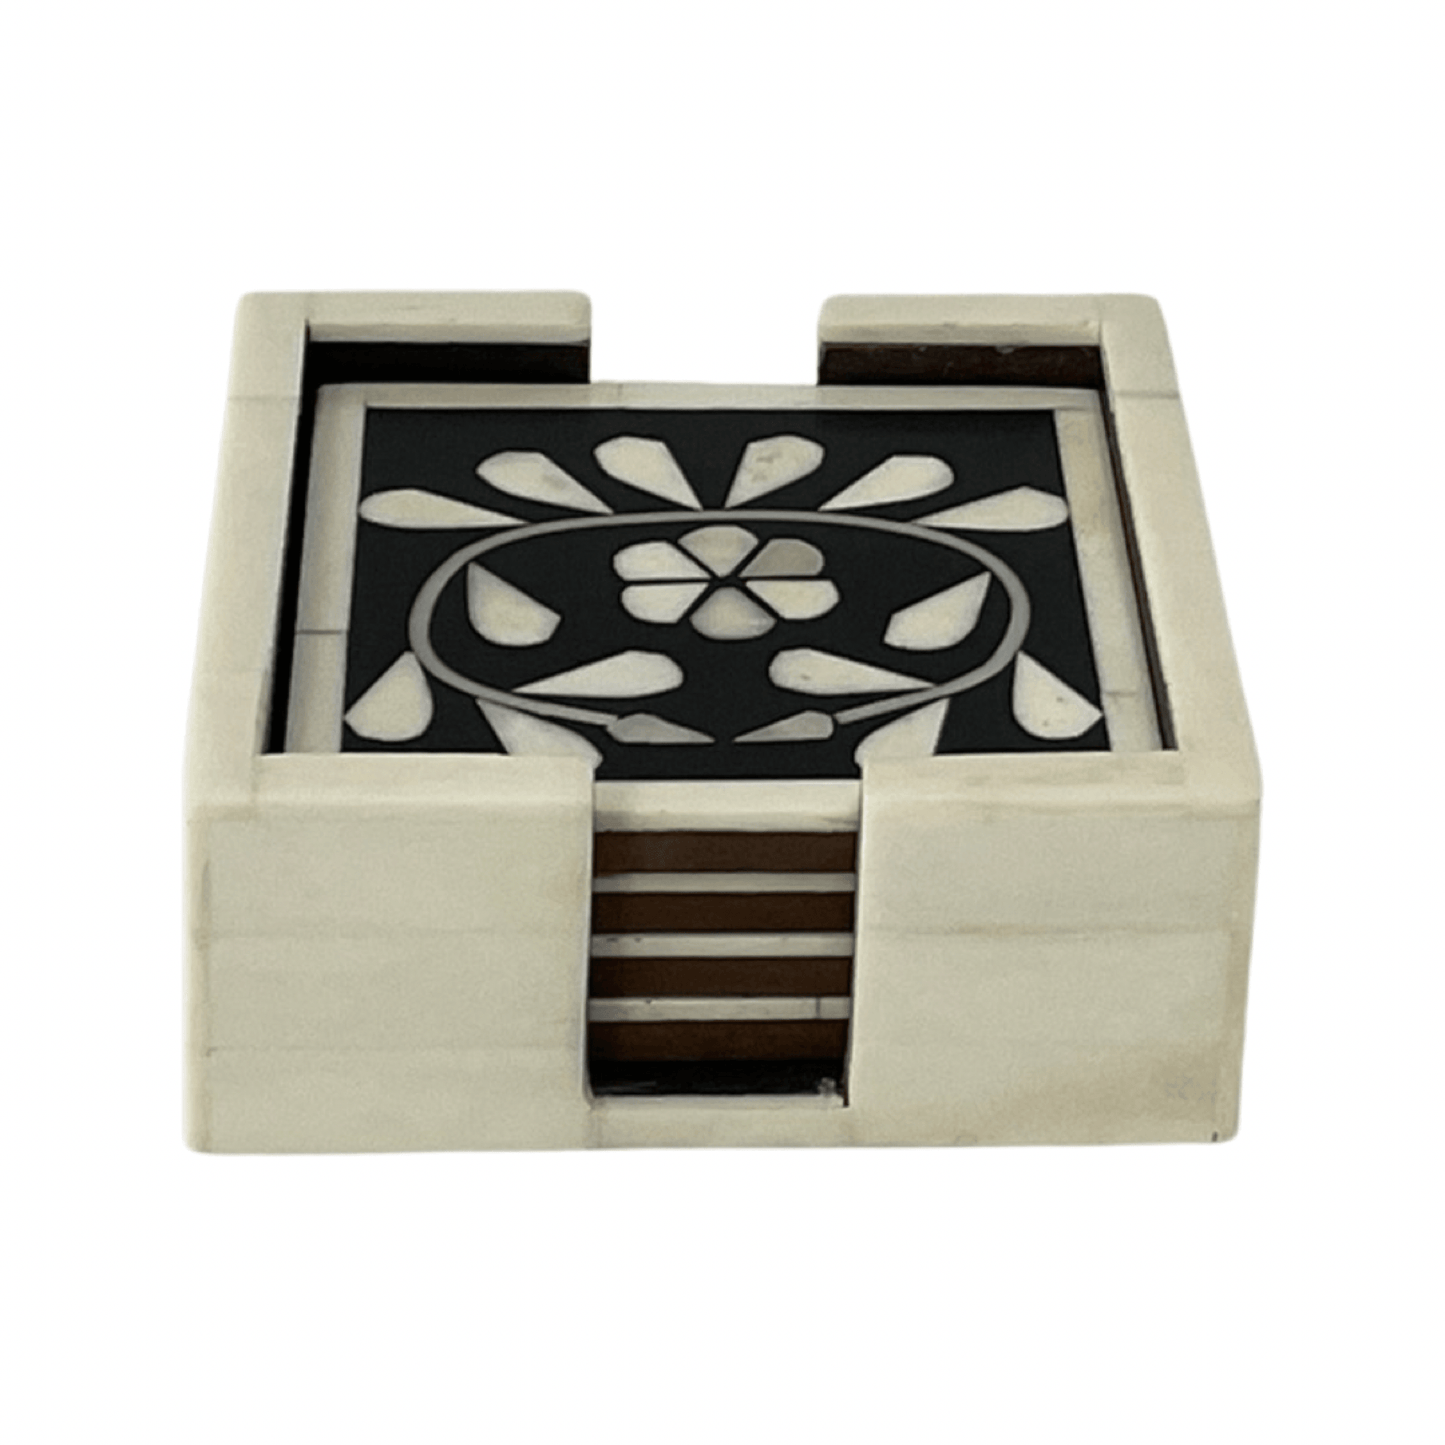 Bone Inlay Coaster with holder - Floral Black - DCOR